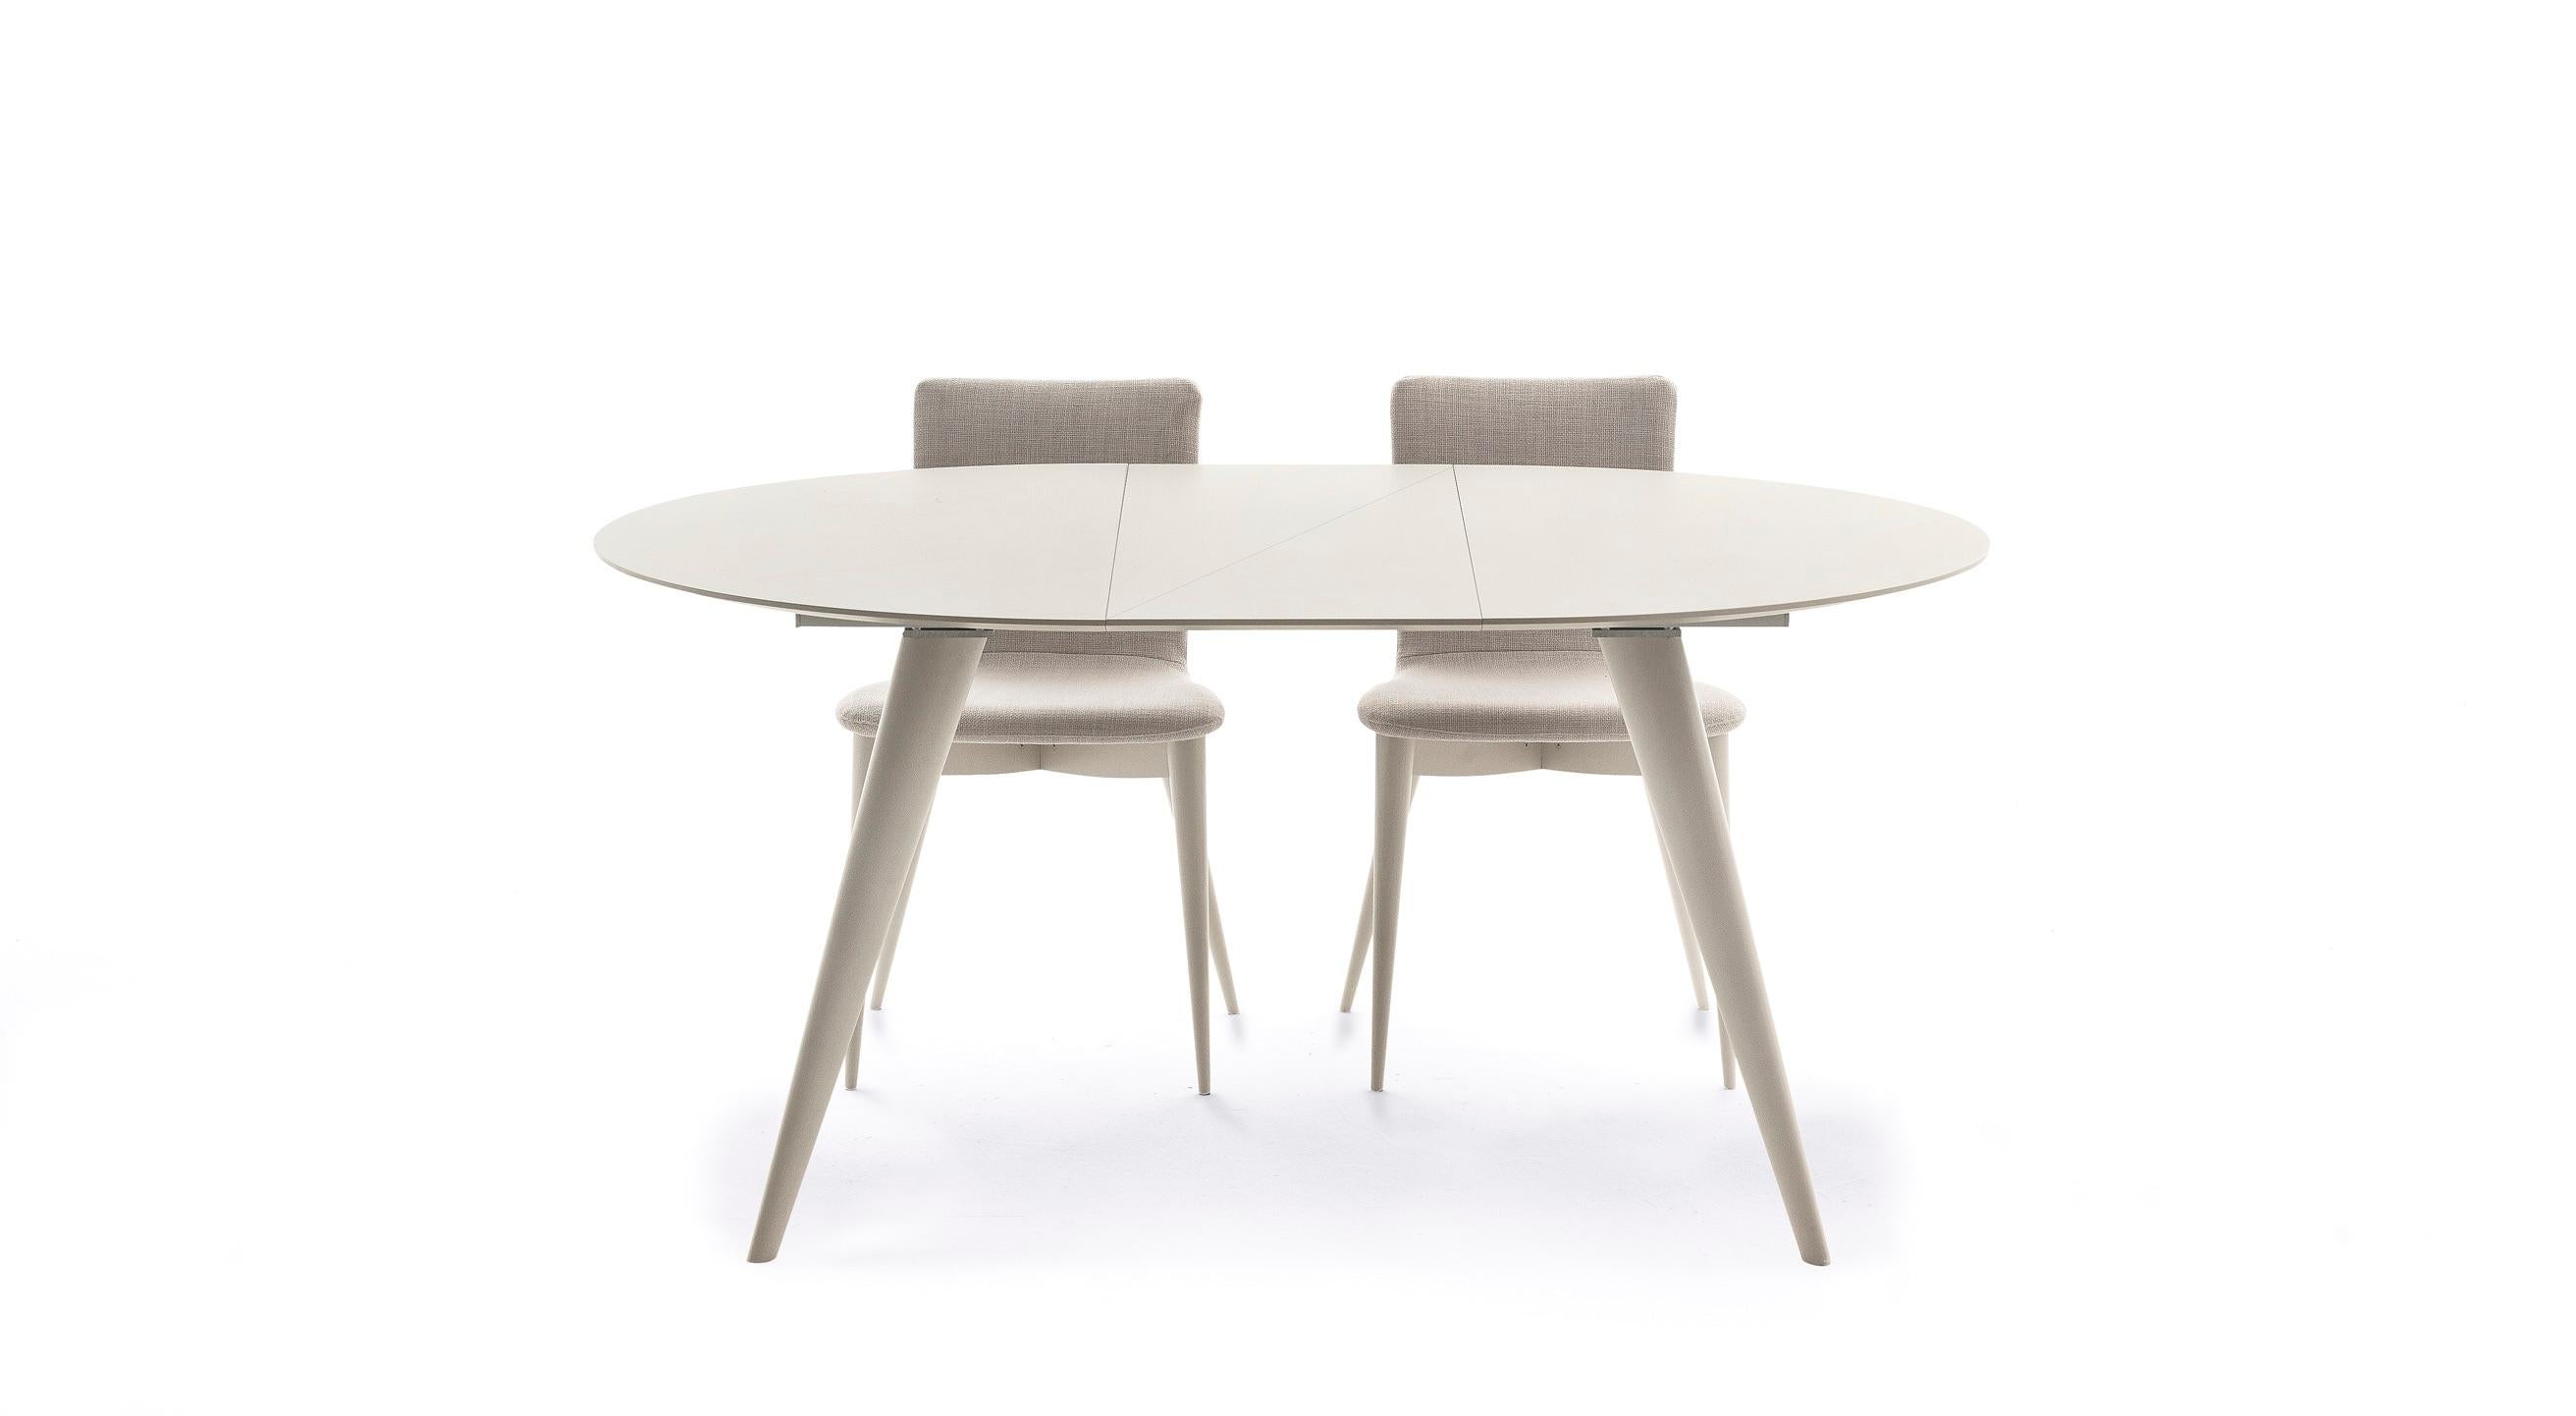 Round extendable dining table with legs in solid ash. Ash veneered top and outside extensions. Aluminium opening mechanism. Available finishing’s: WG wengé, NC walnut, TB tobacco, open pore matte lacquered (L21 white, L29 pearl, L23 cappuccino